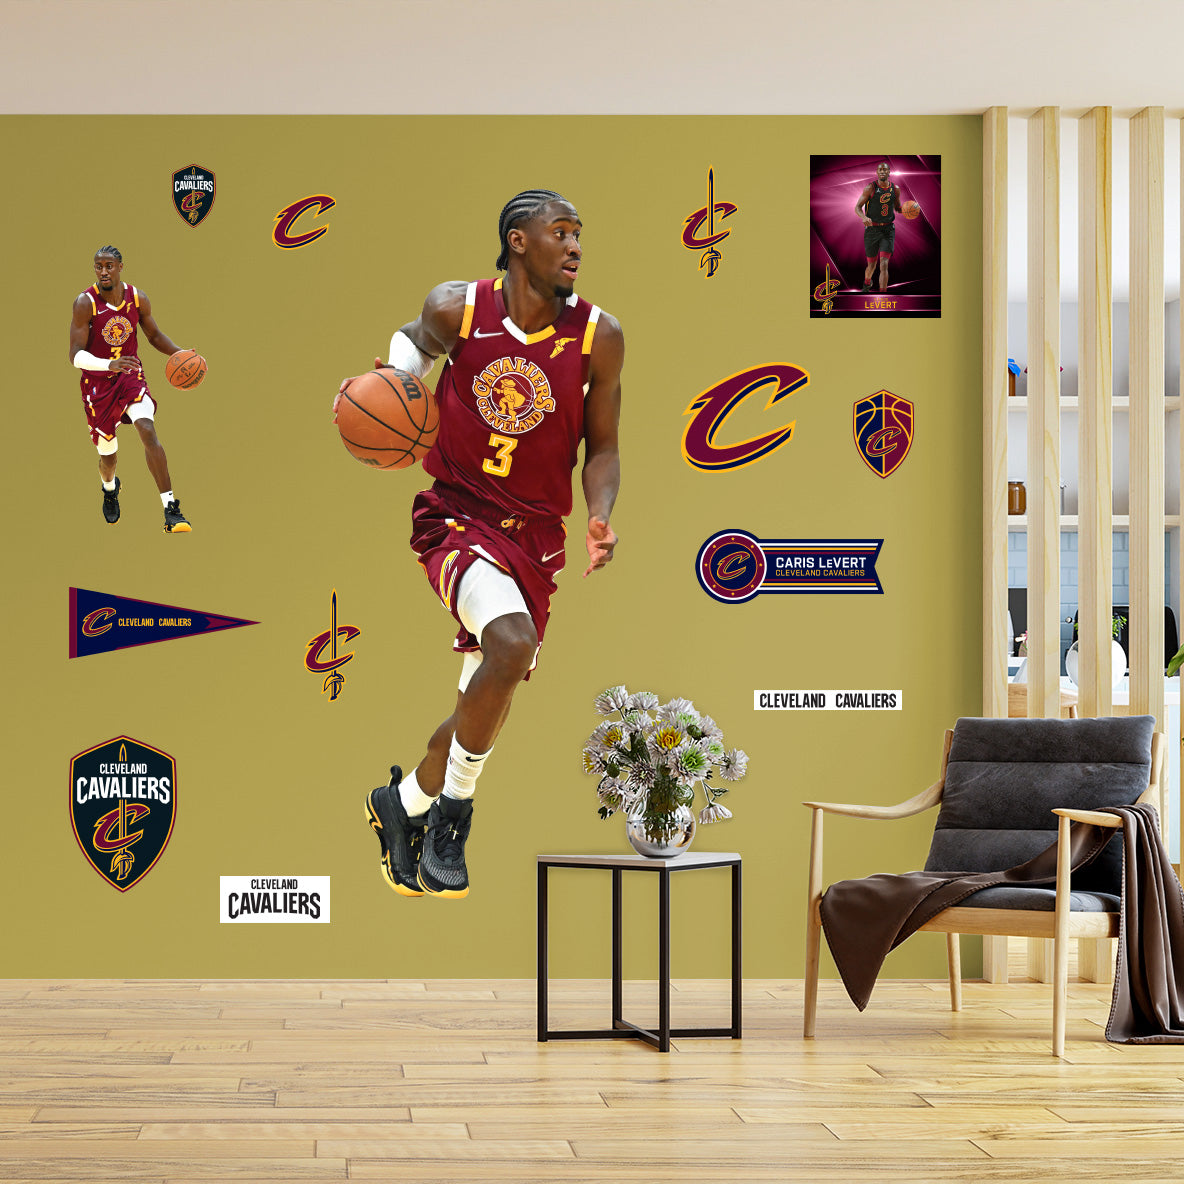 Cleveland Cavaliers: Arena Mural - Officially Licensed NBA Removable Wall  Adhesive Decal